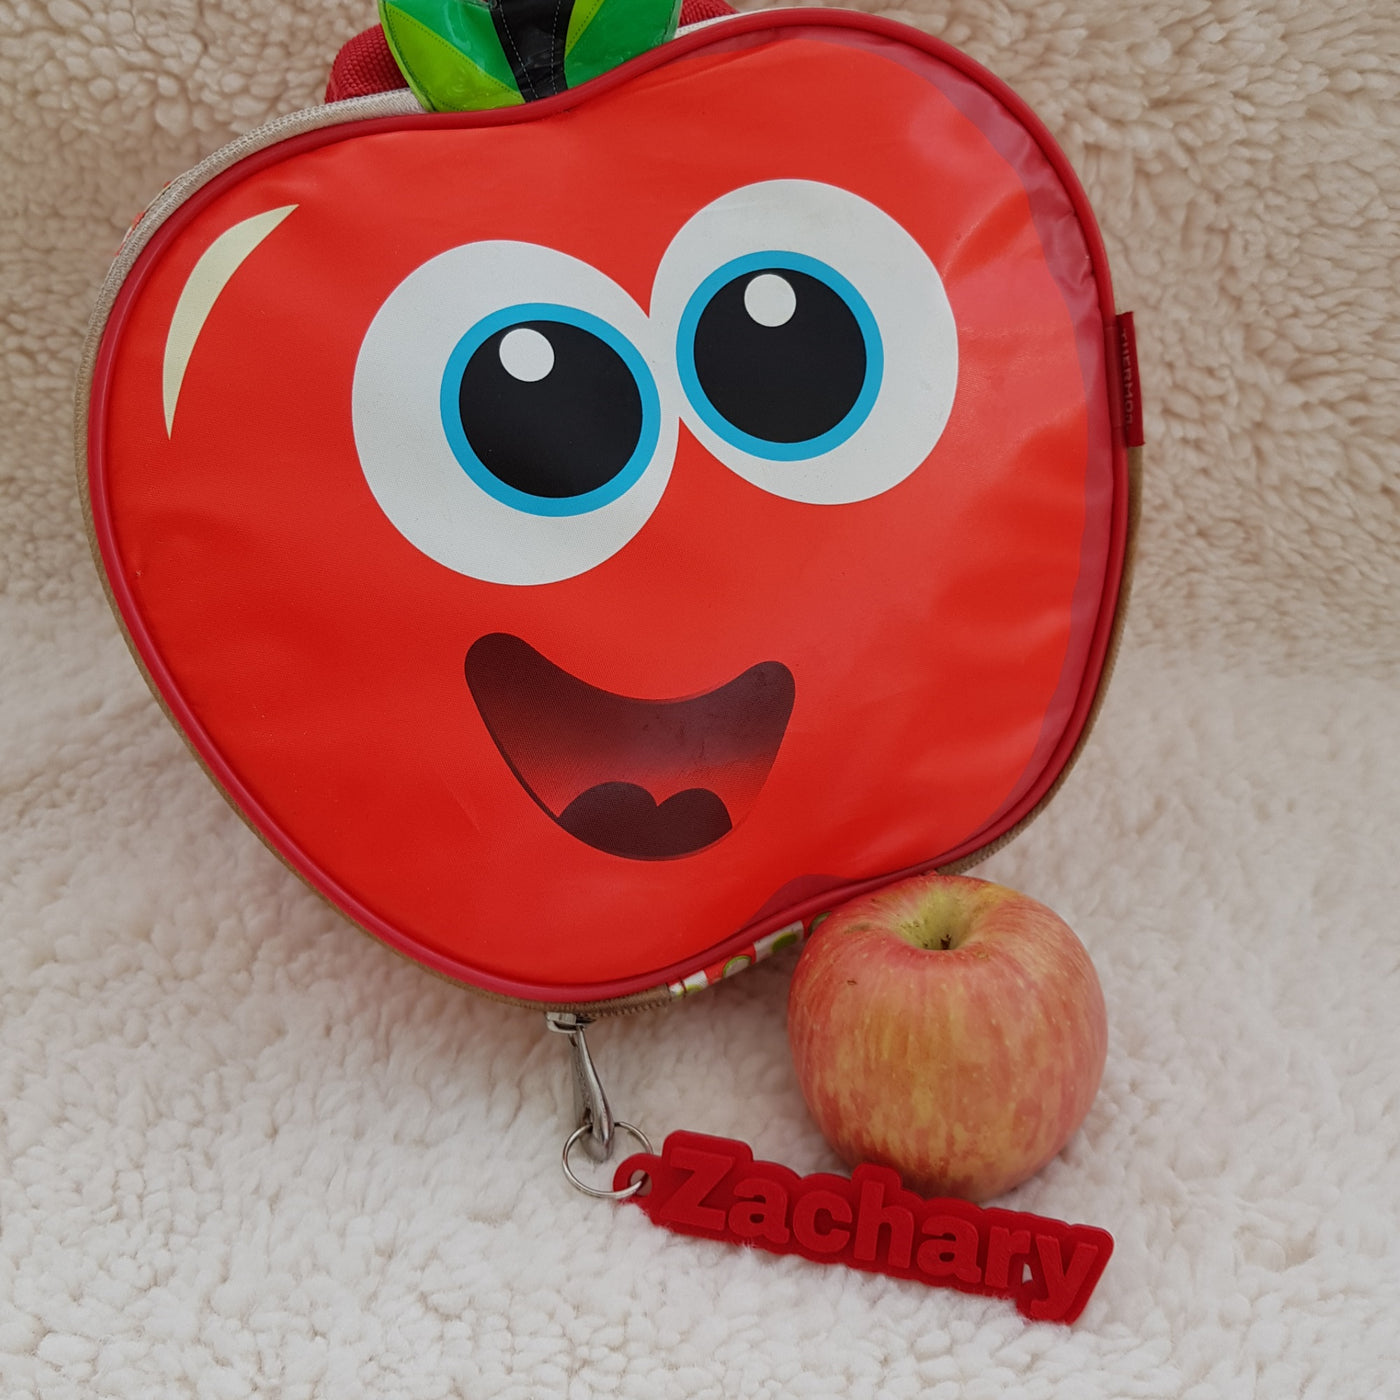 Personalised 3d printed keyring for a school lunch bag